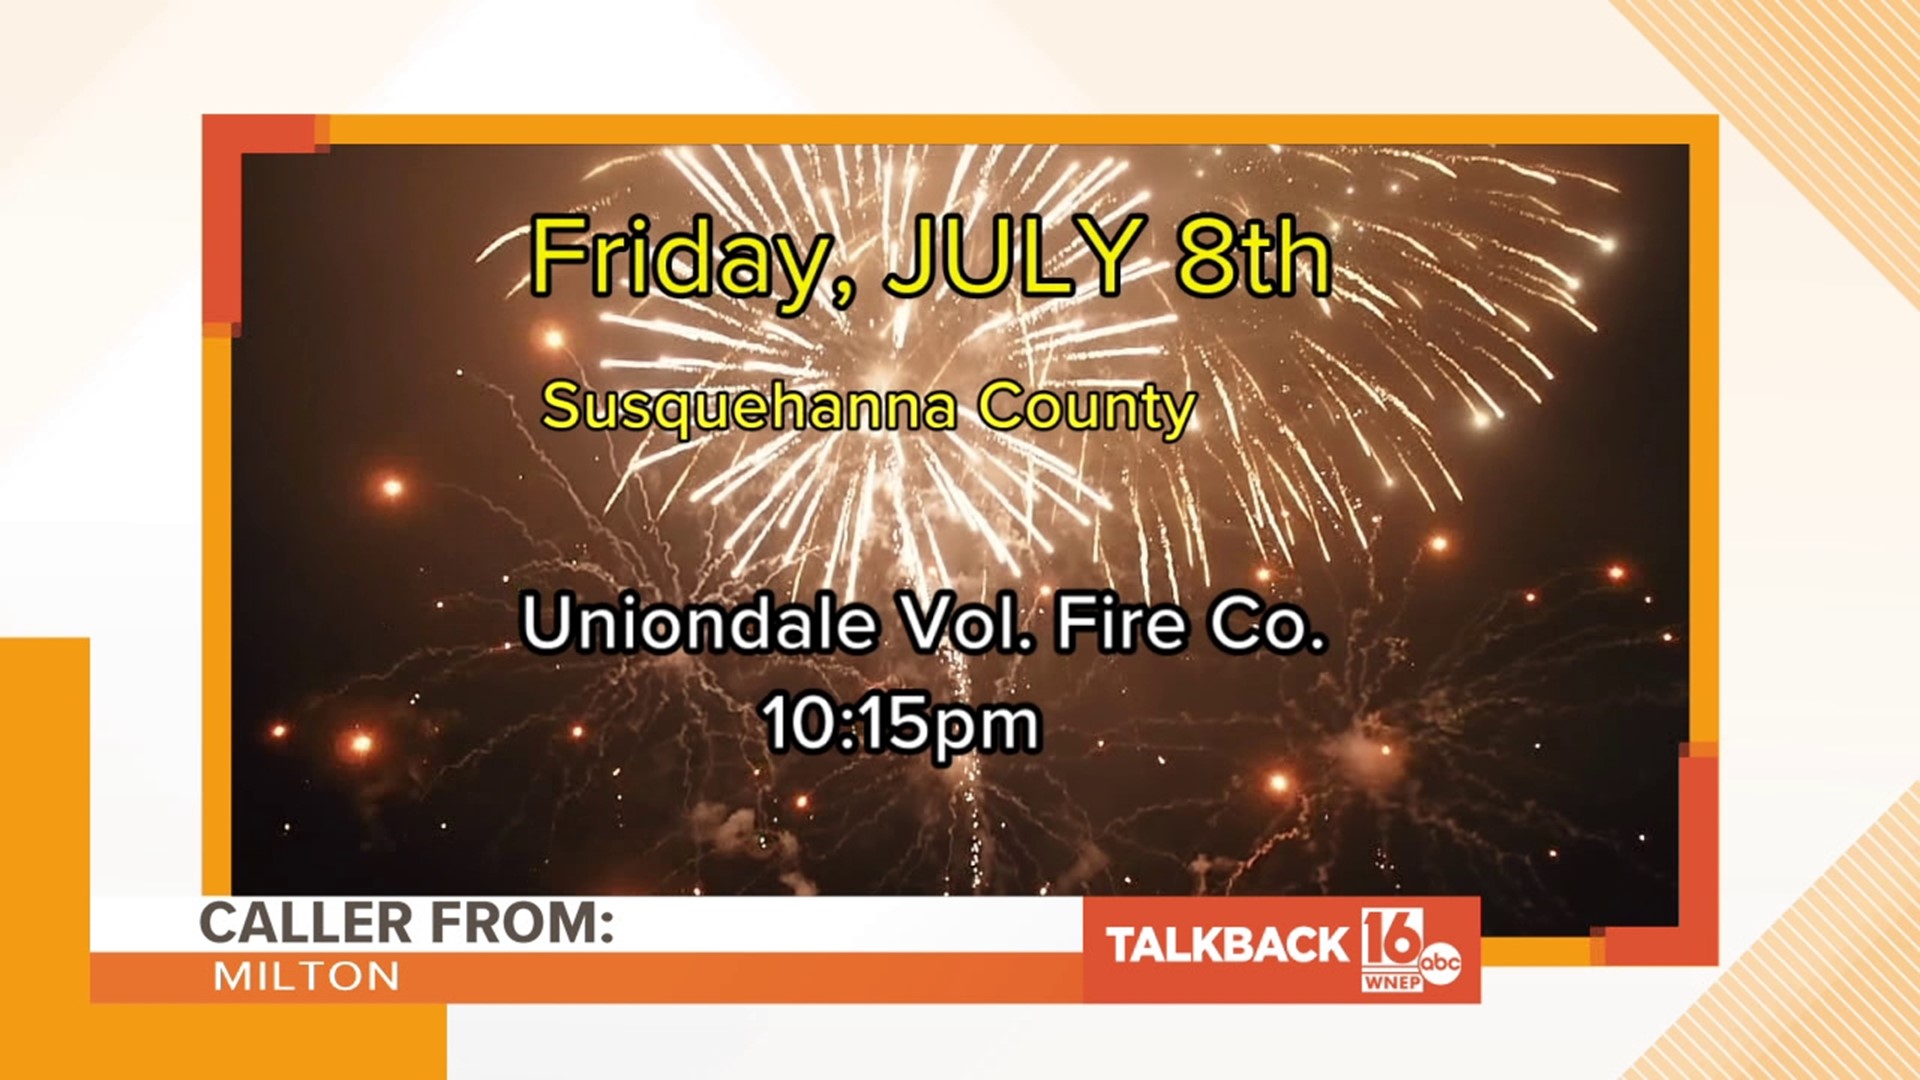 A caller from Milton is commenting on fireworks displays continuing after the July 4th holiday.